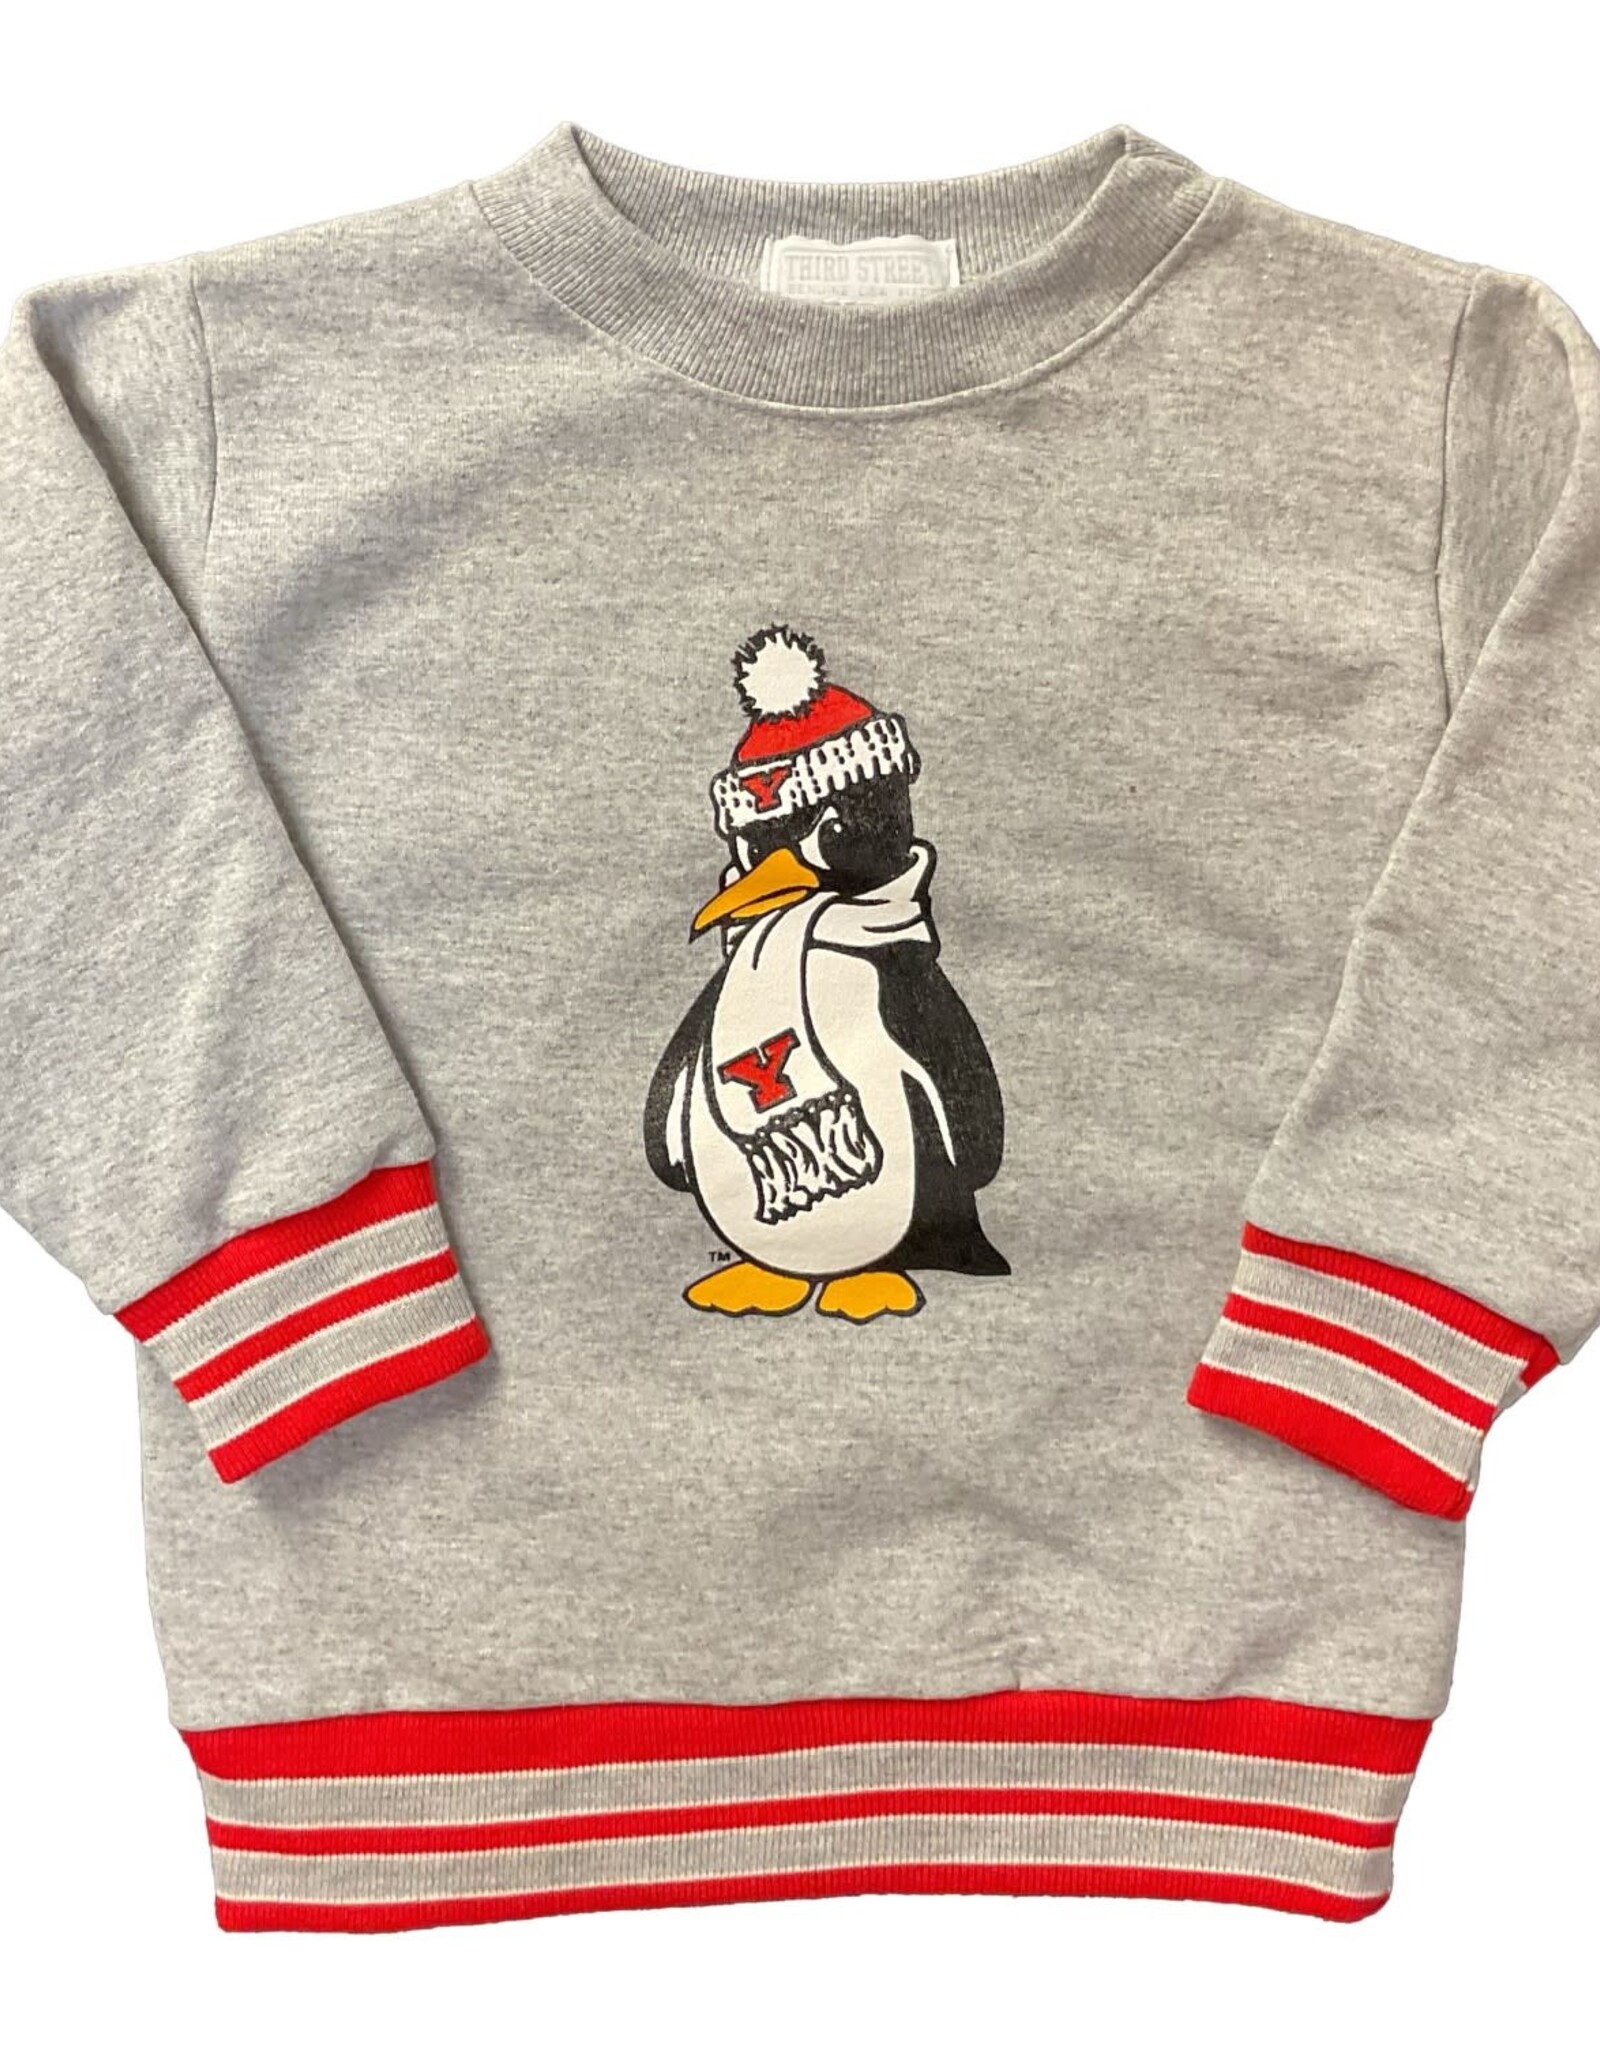 THIRD STREET SPORTSWEAR Youngstown State Penguins Youth University Crew